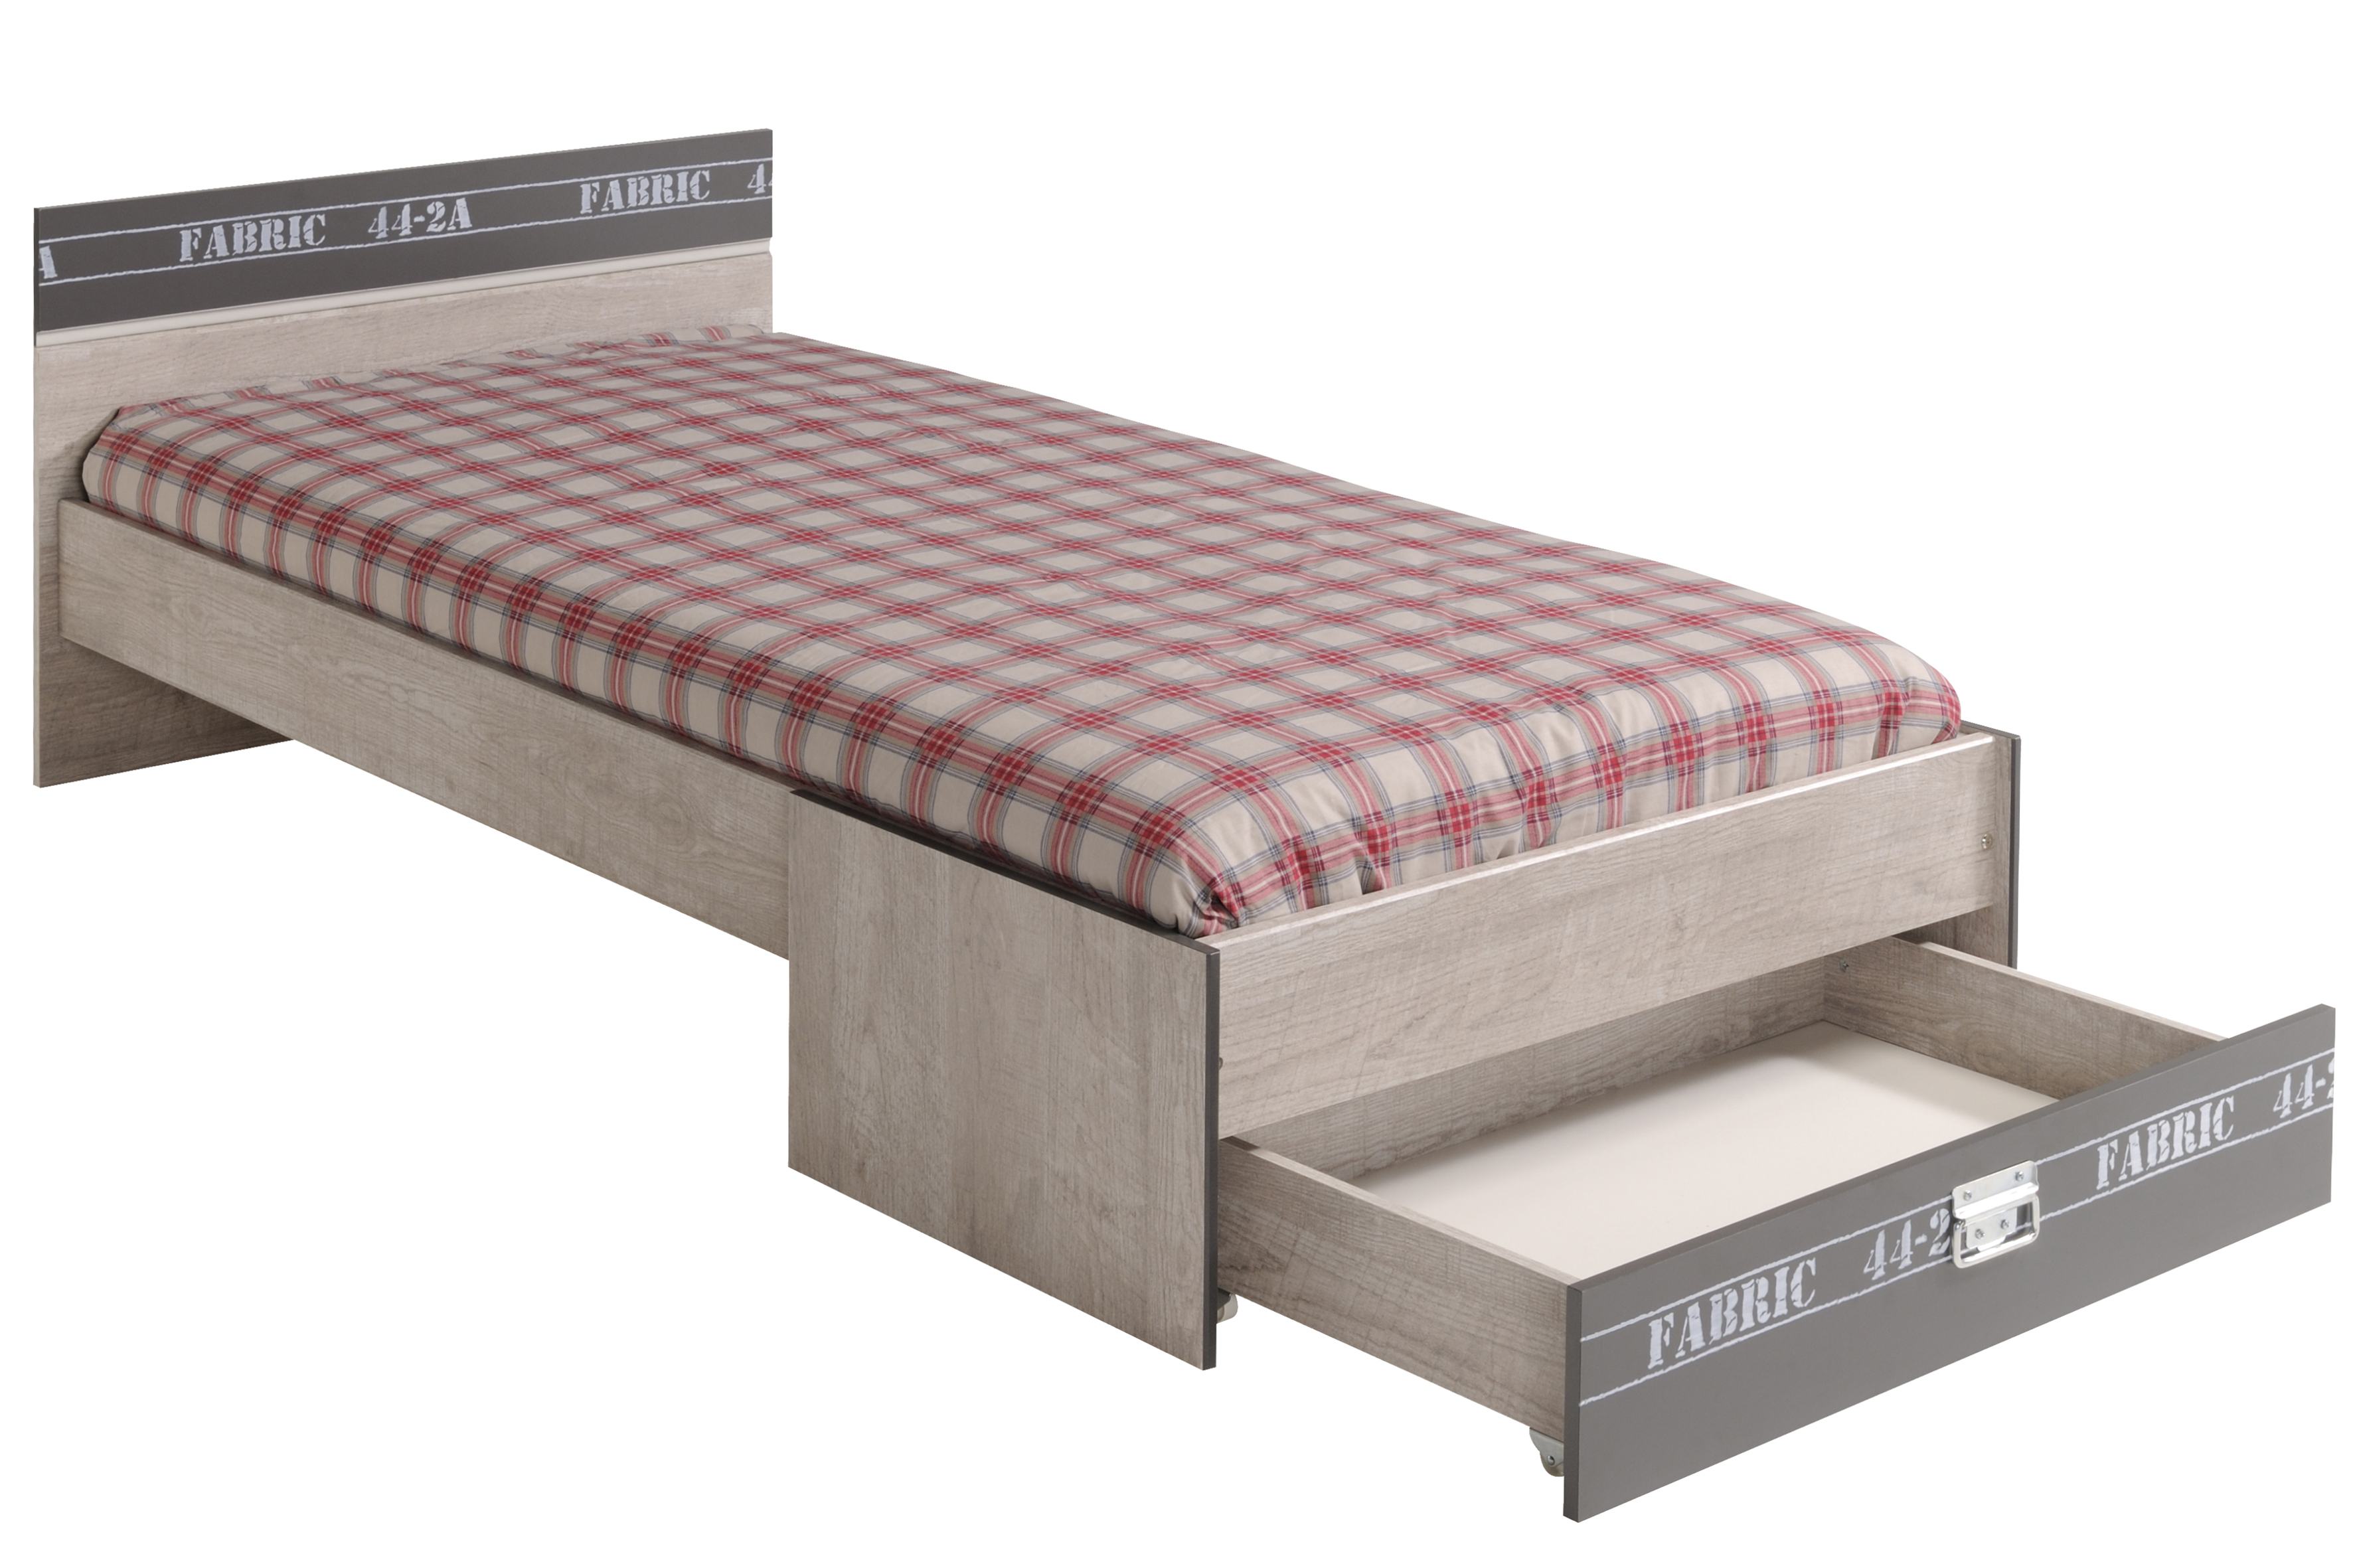 Parisot Fabric Bed Frame Single